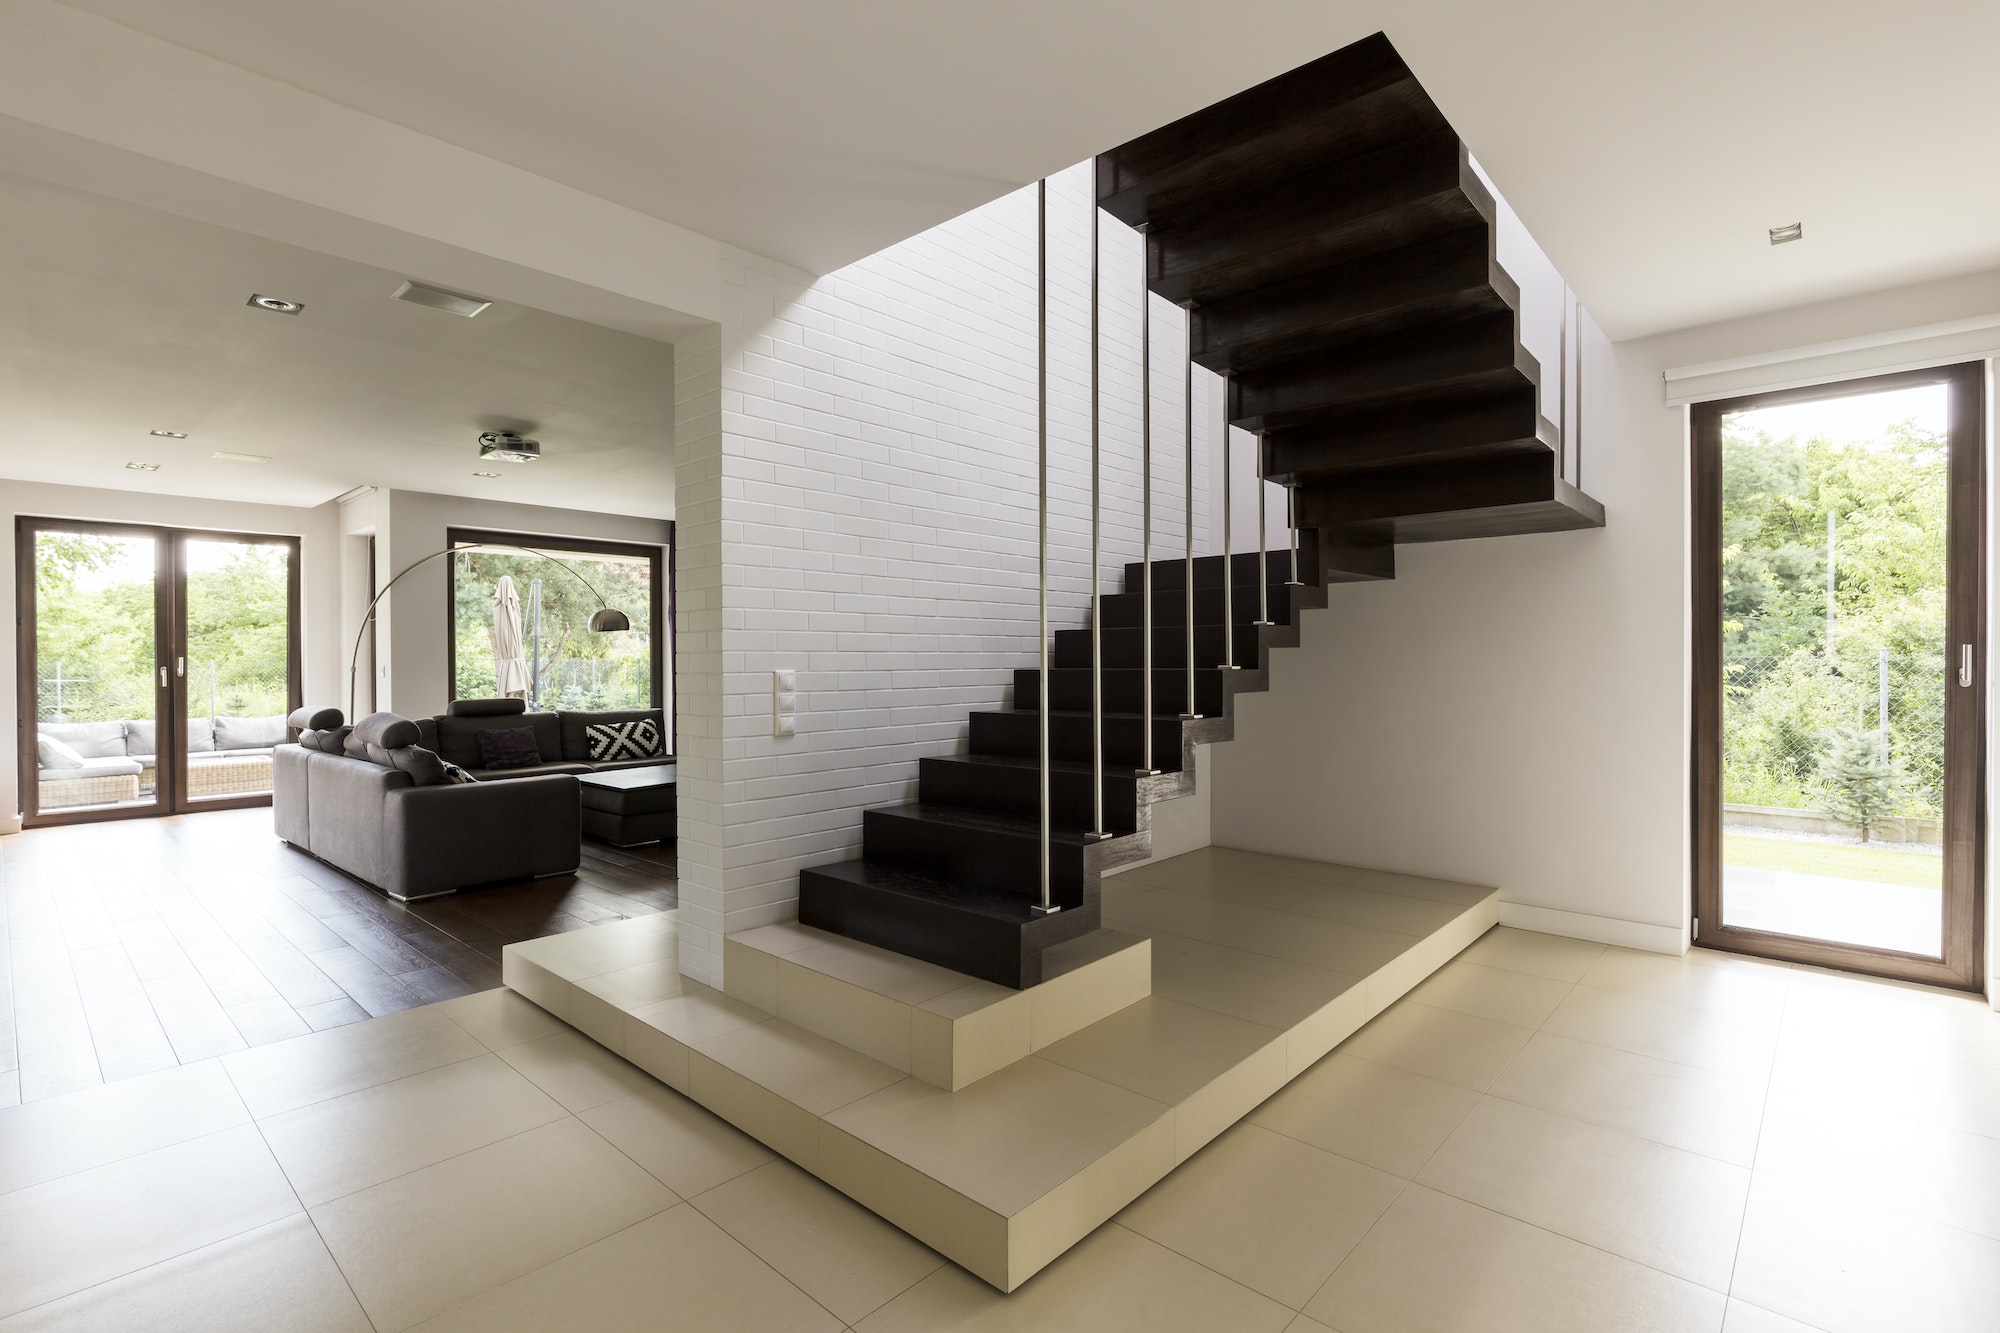 Staircase in the living room